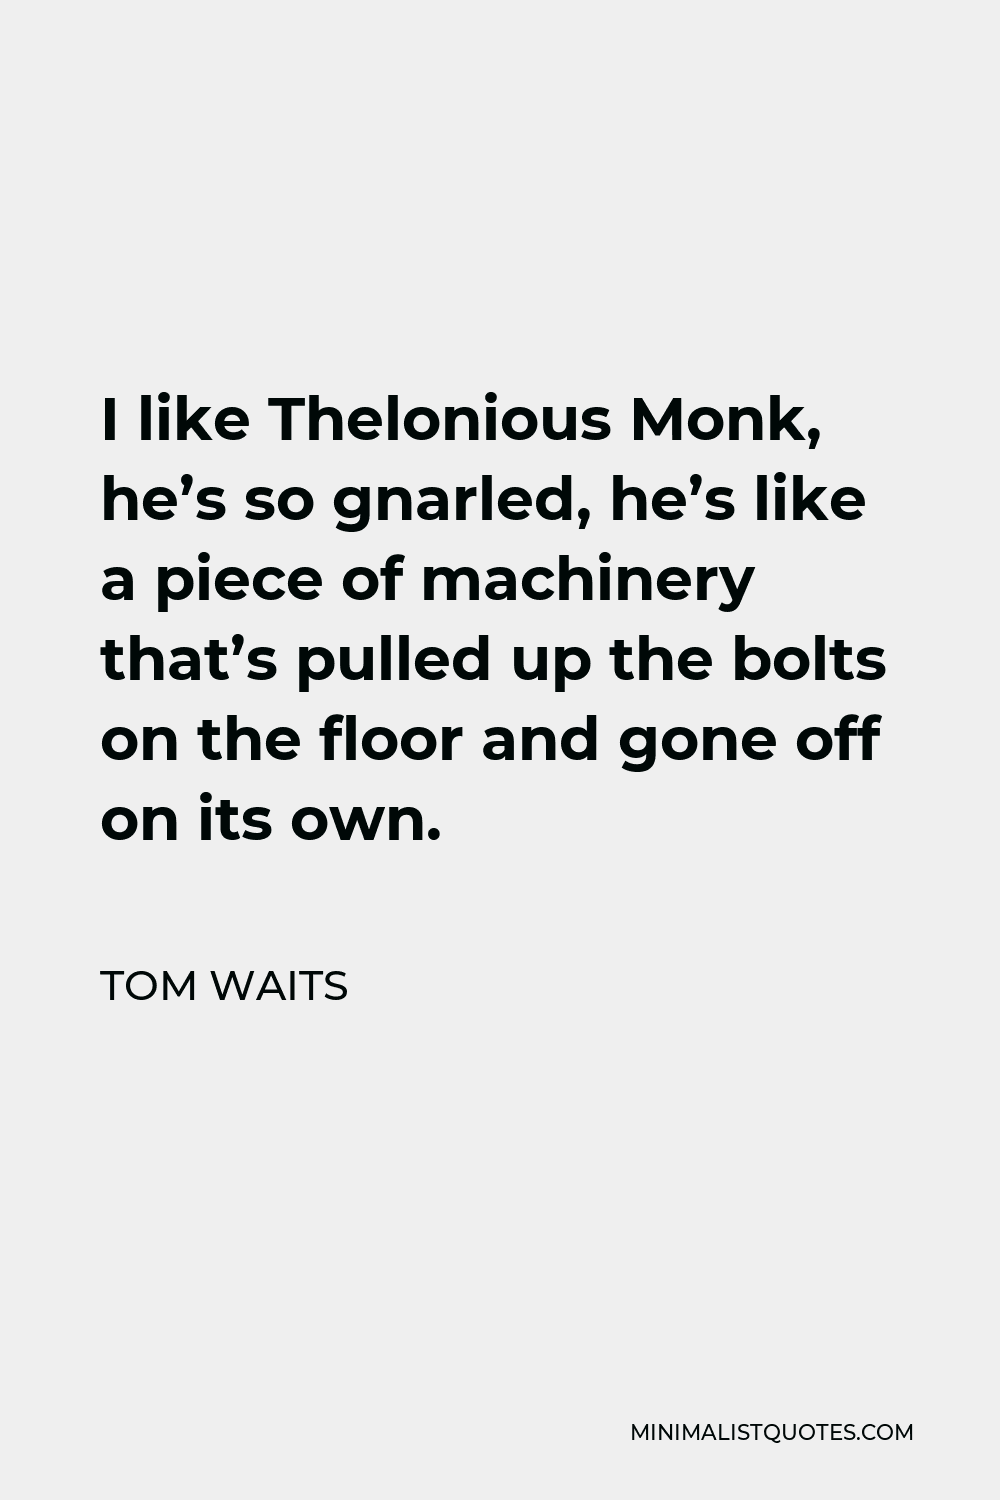 Tom Waits Quote - I like Thelonious Monk, he’s so gnarled, he’s like a piece of machinery that’s pulled up the bolts on the floor and gone off on its own.